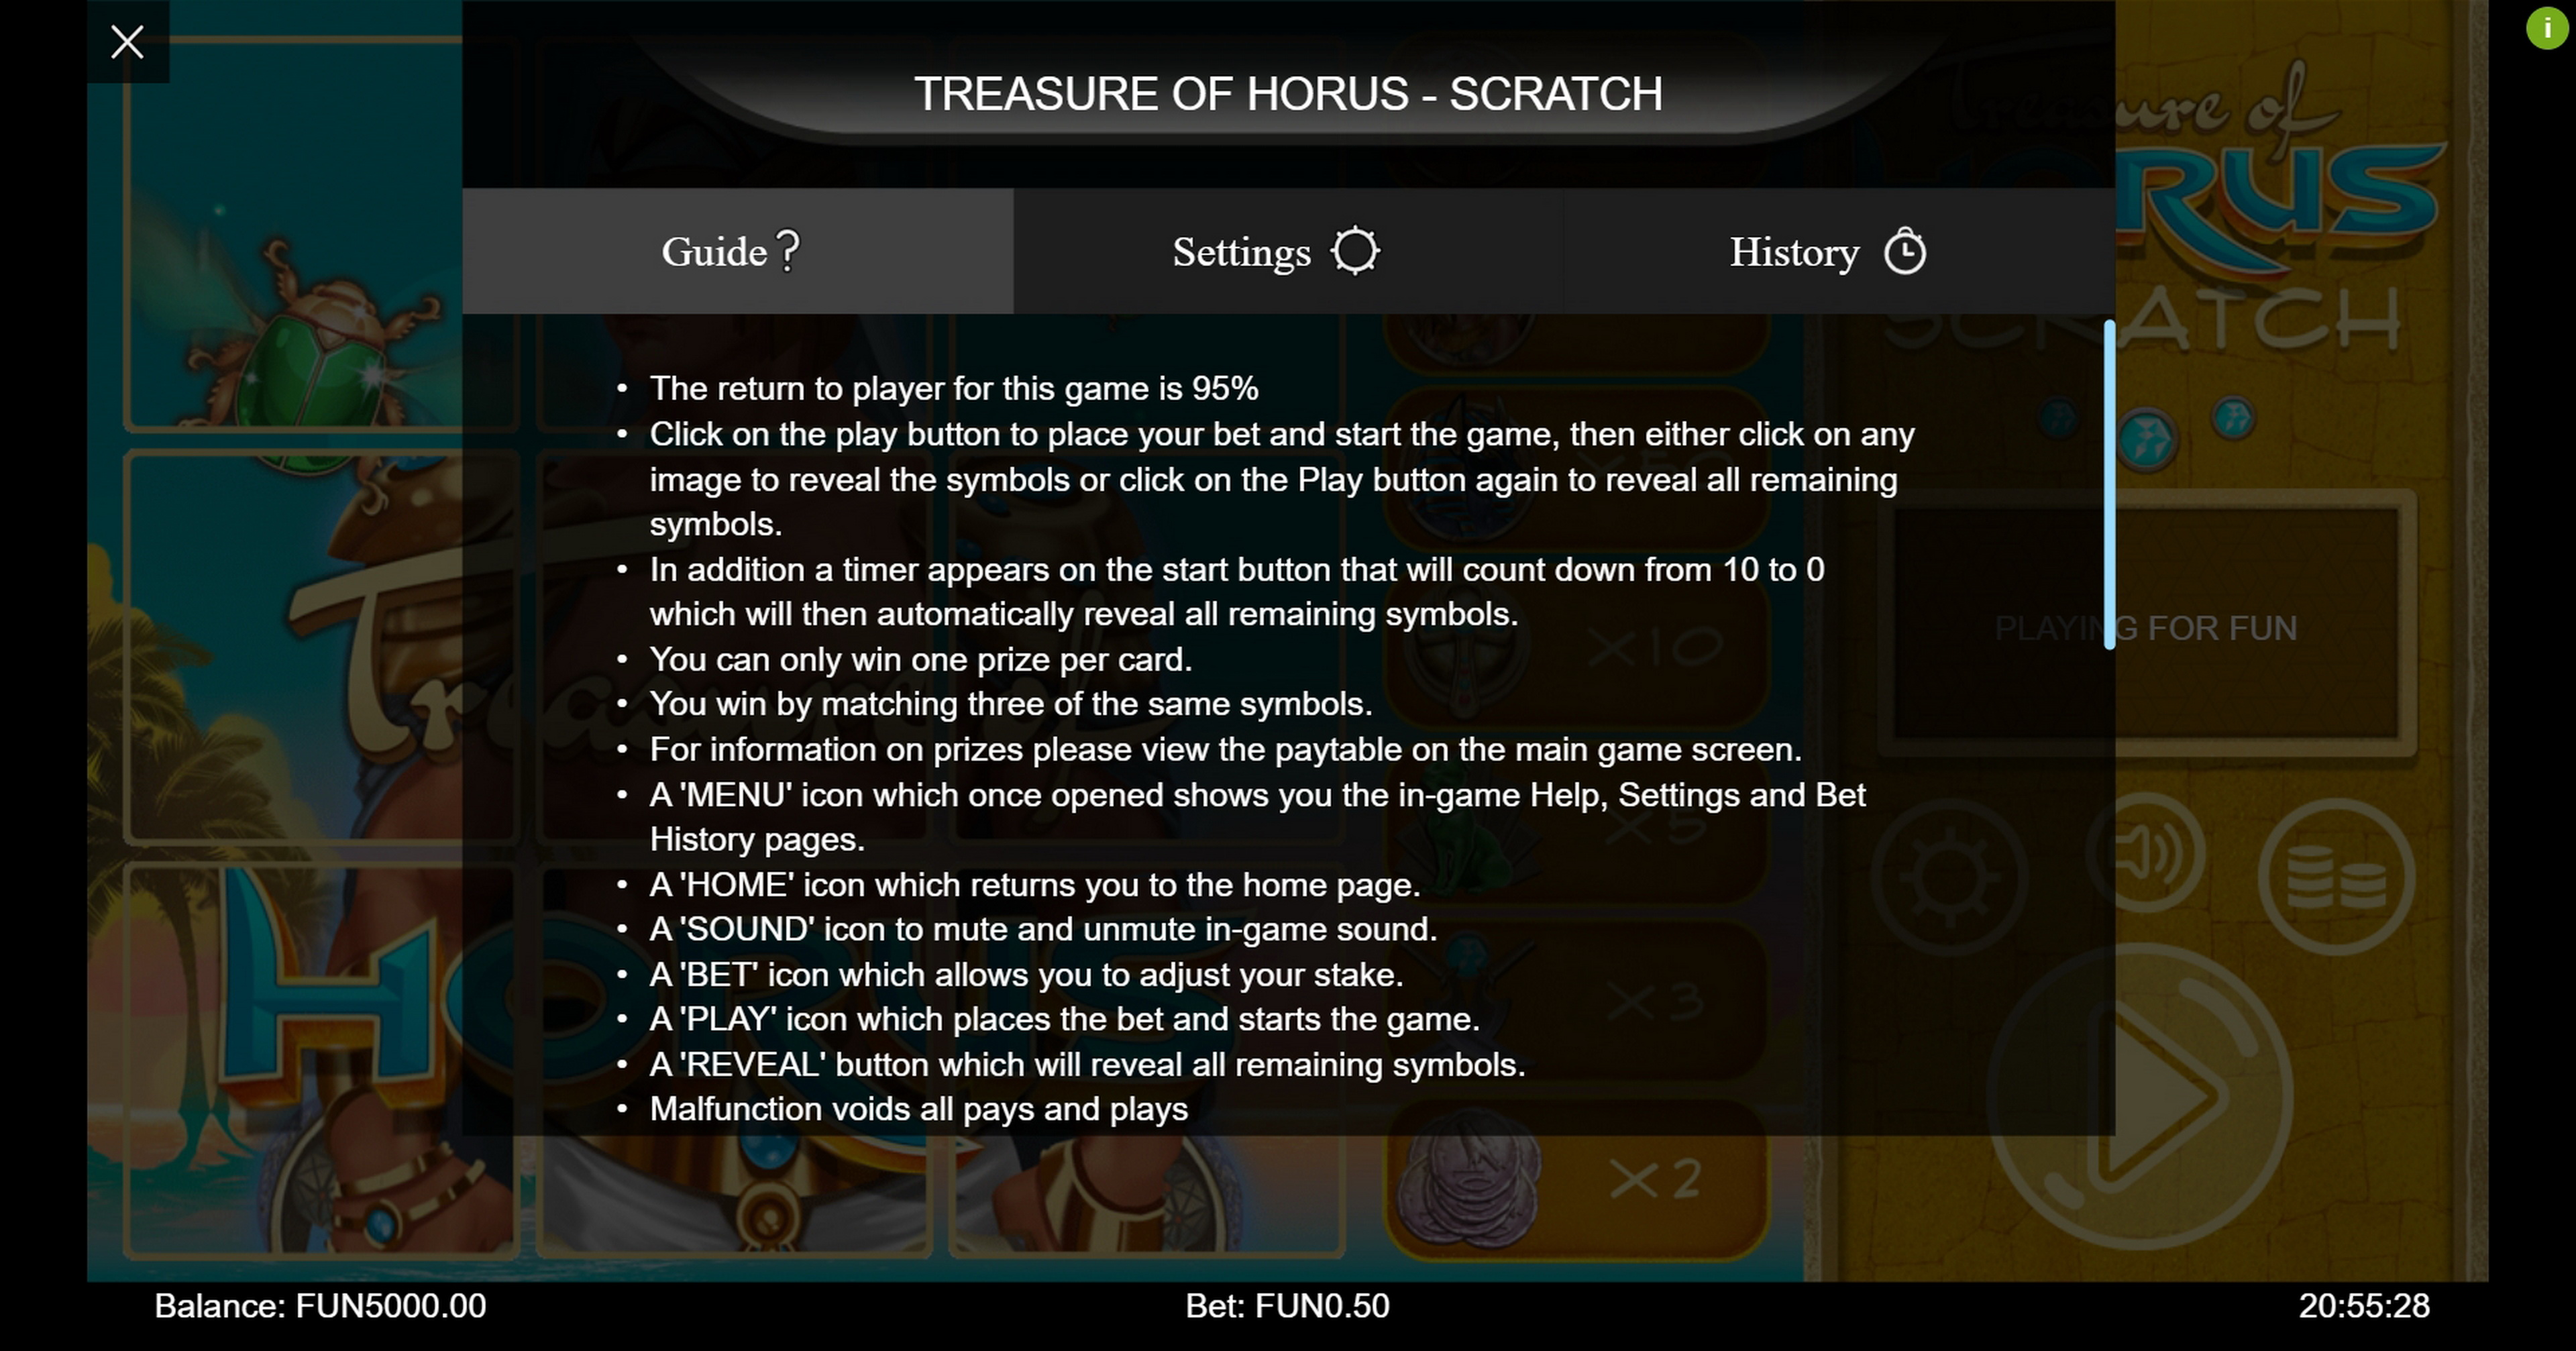 Info of Treasure of Horus Scratch Slot Game by Iron Dog Studios